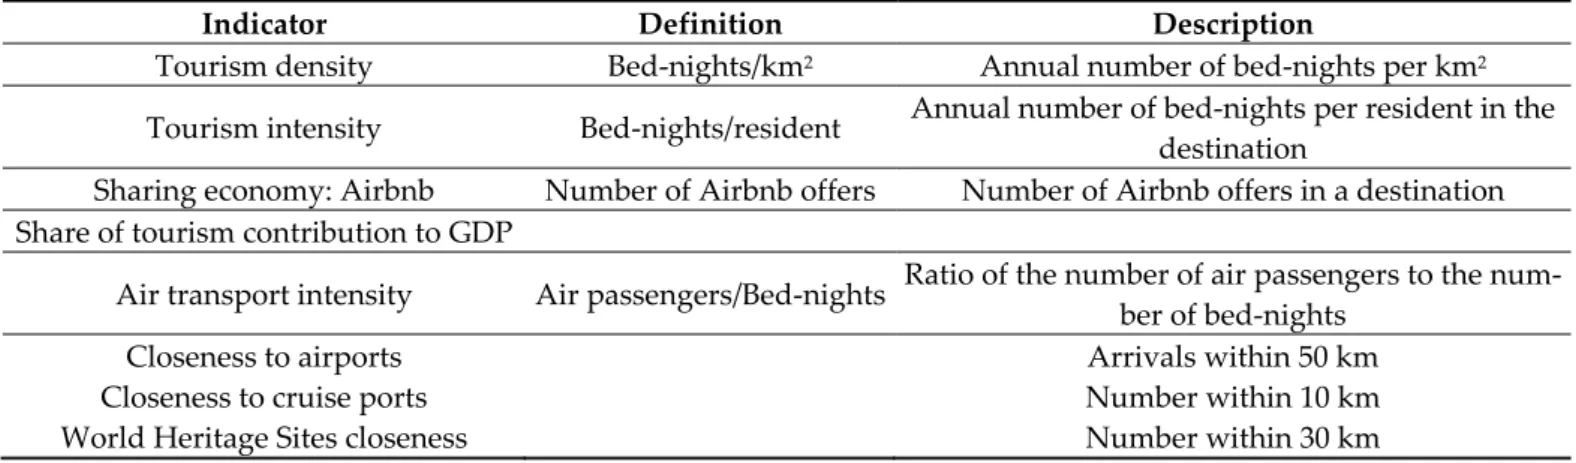 Table 1. Indicators of overtourism. Source: [40]. 